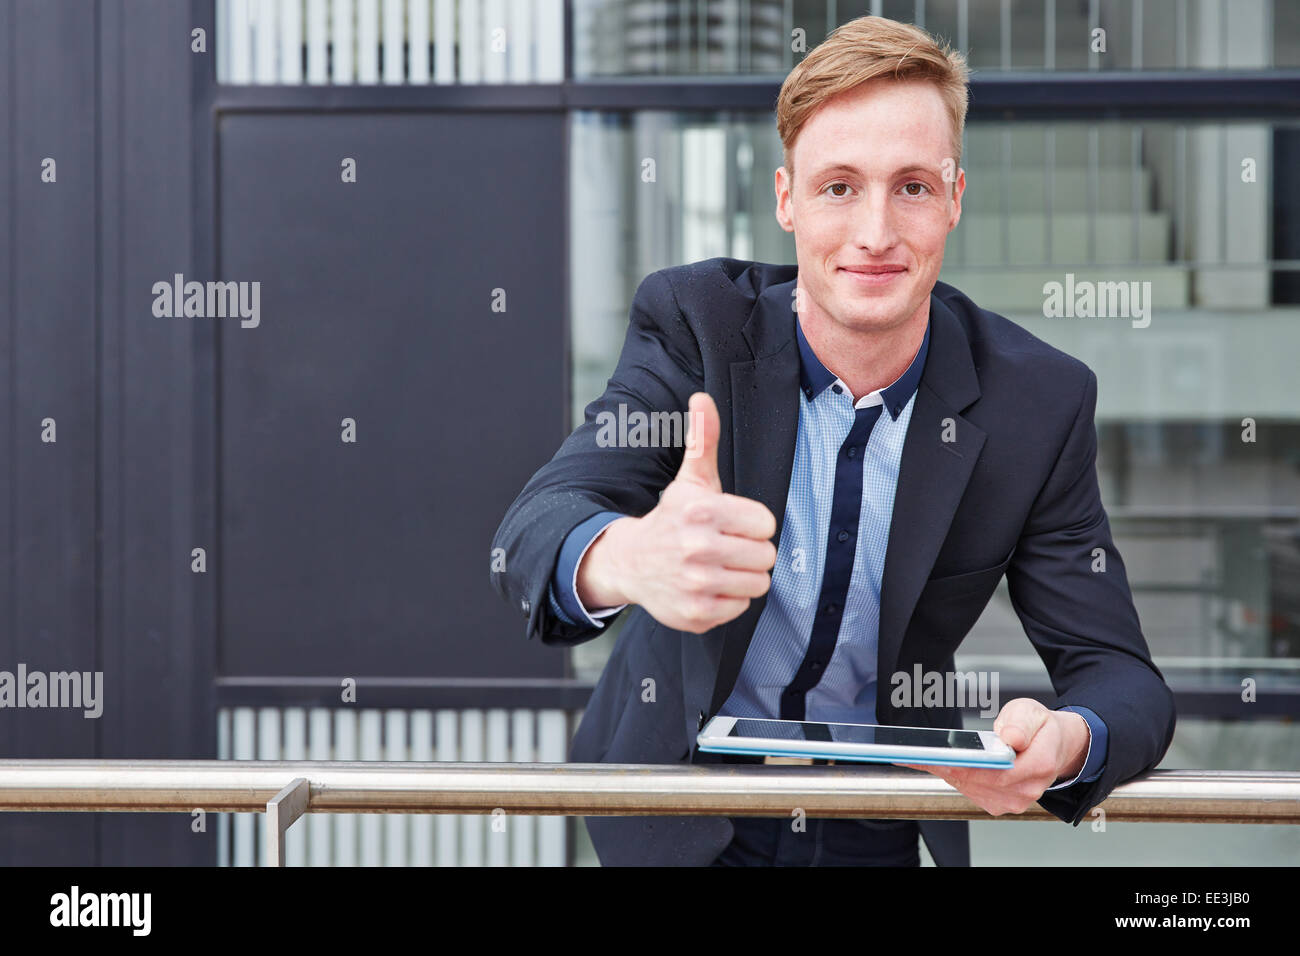 Smiling young business man with tablet computer holding his thumbs up Stock Photo